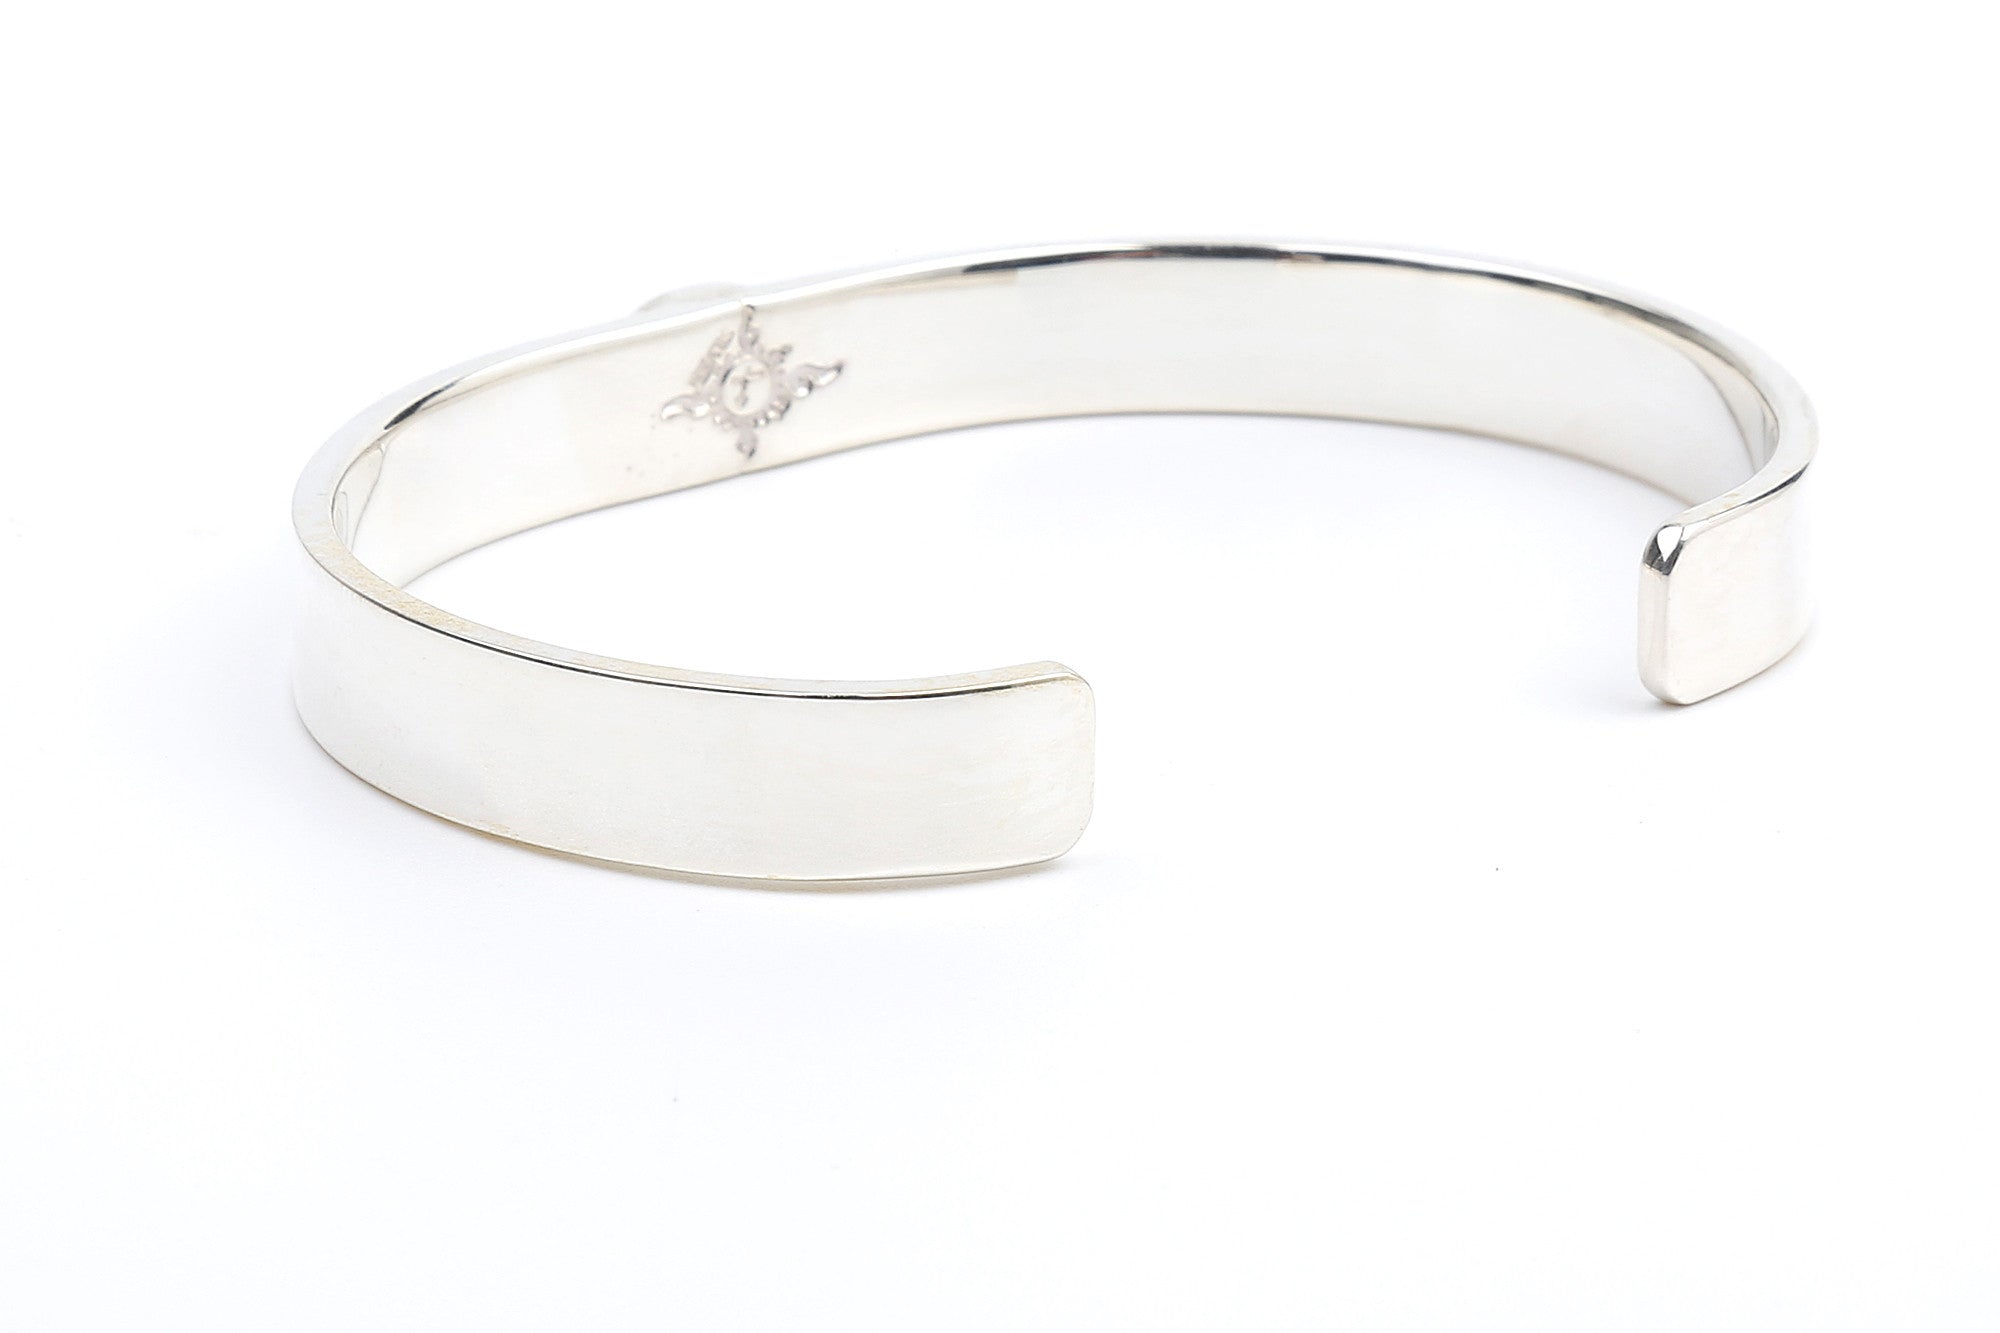 First Arrow's 8mm "Soulo" Bangle